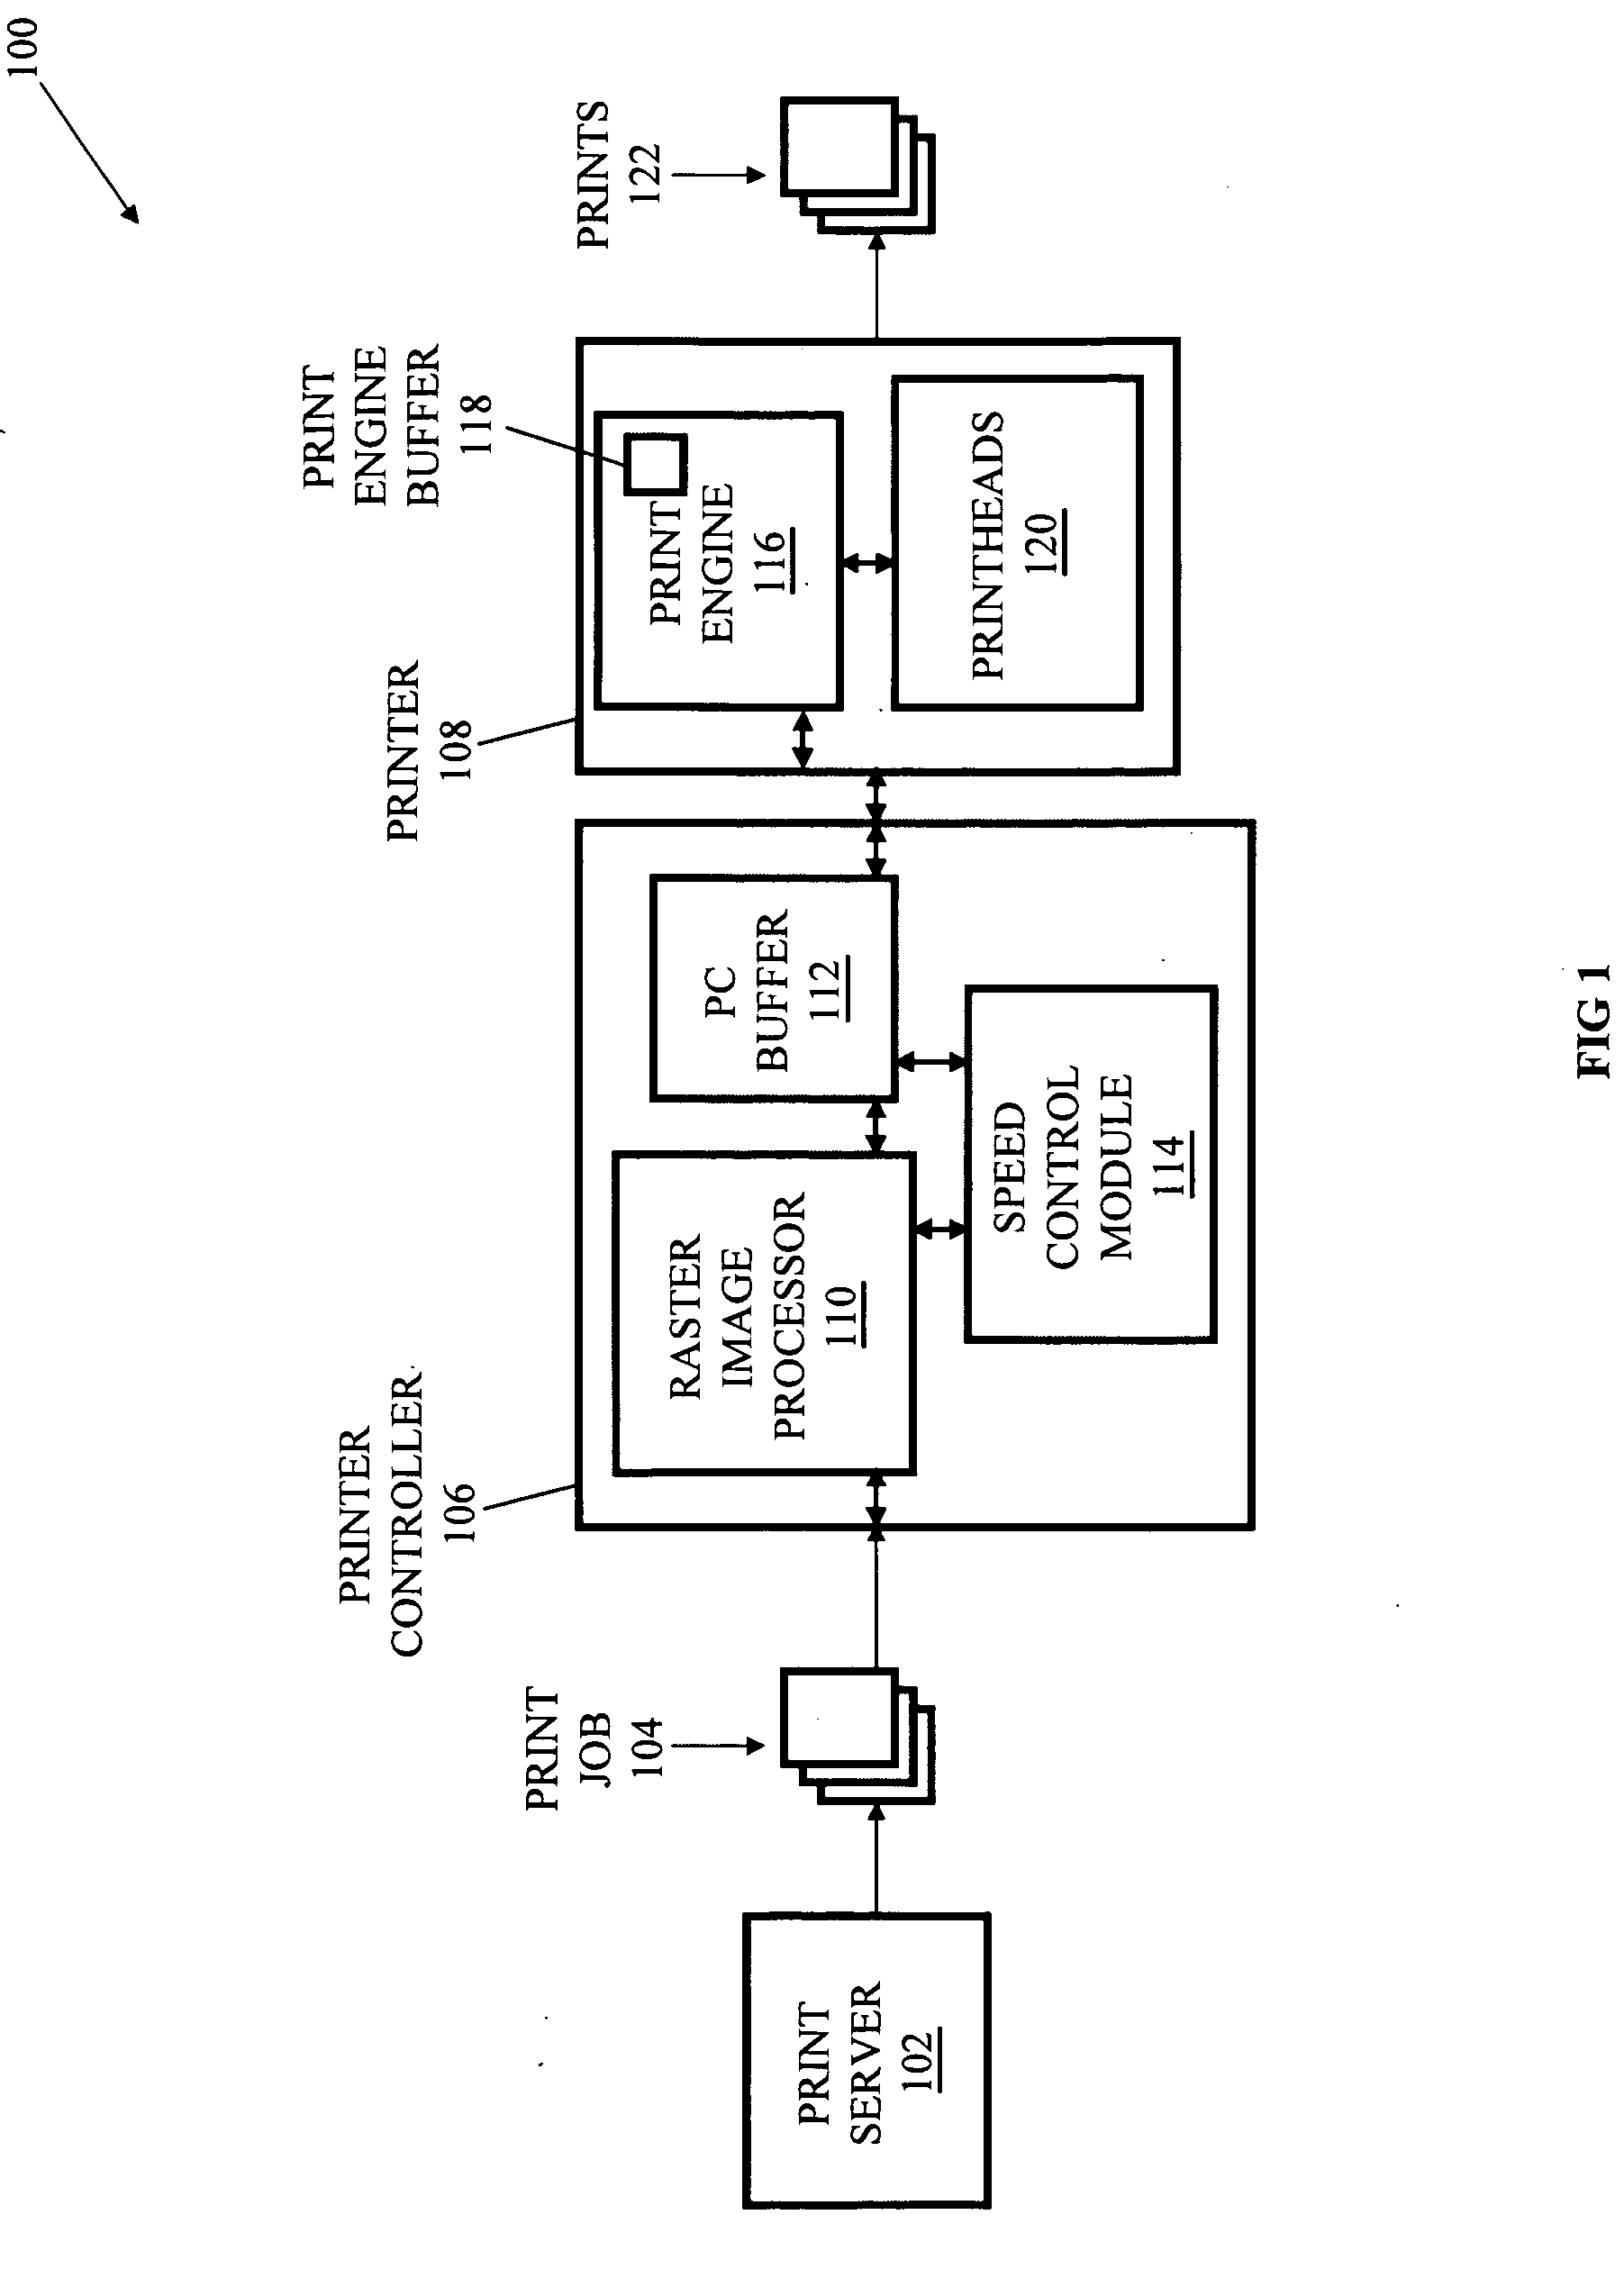 Systems, methods, media for managing the print speed of a variable speed printer